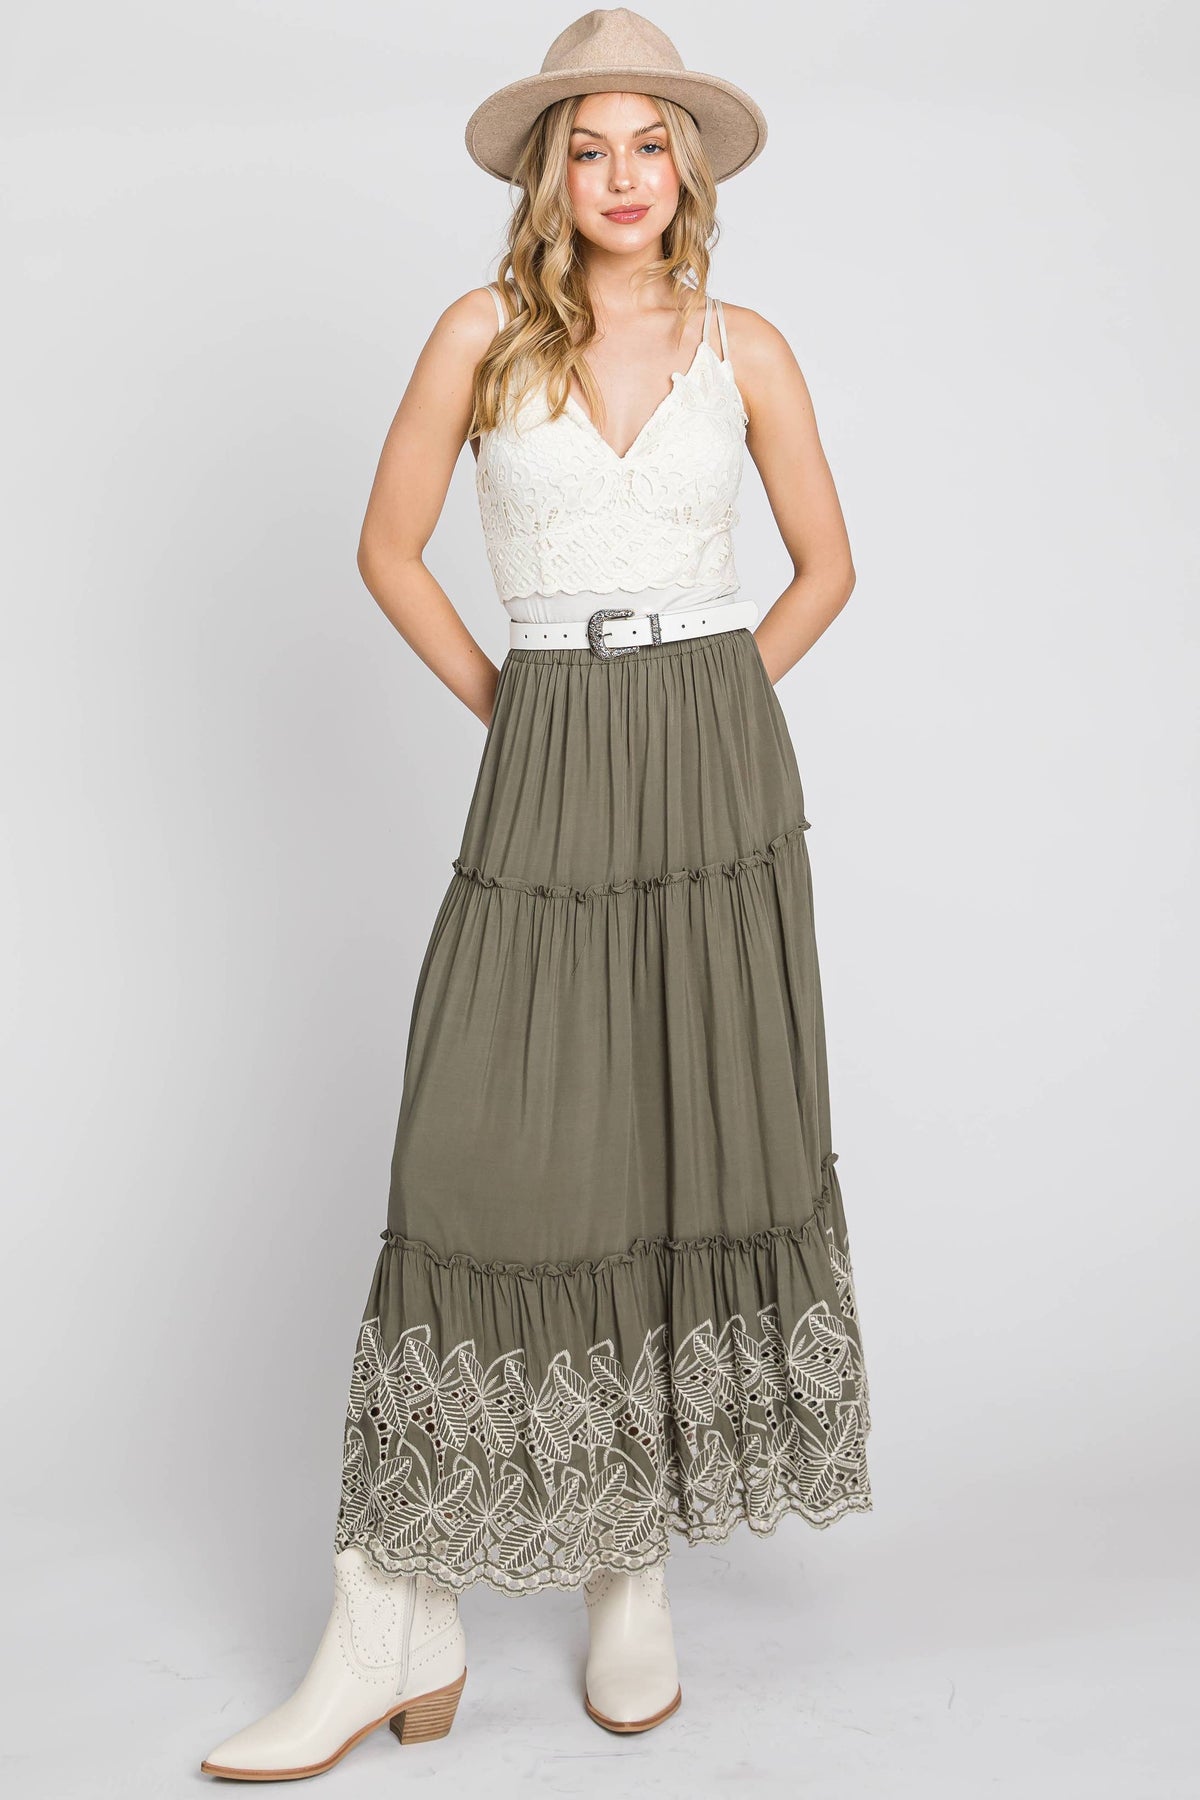 Green tiered maxi skirt with white embroidery